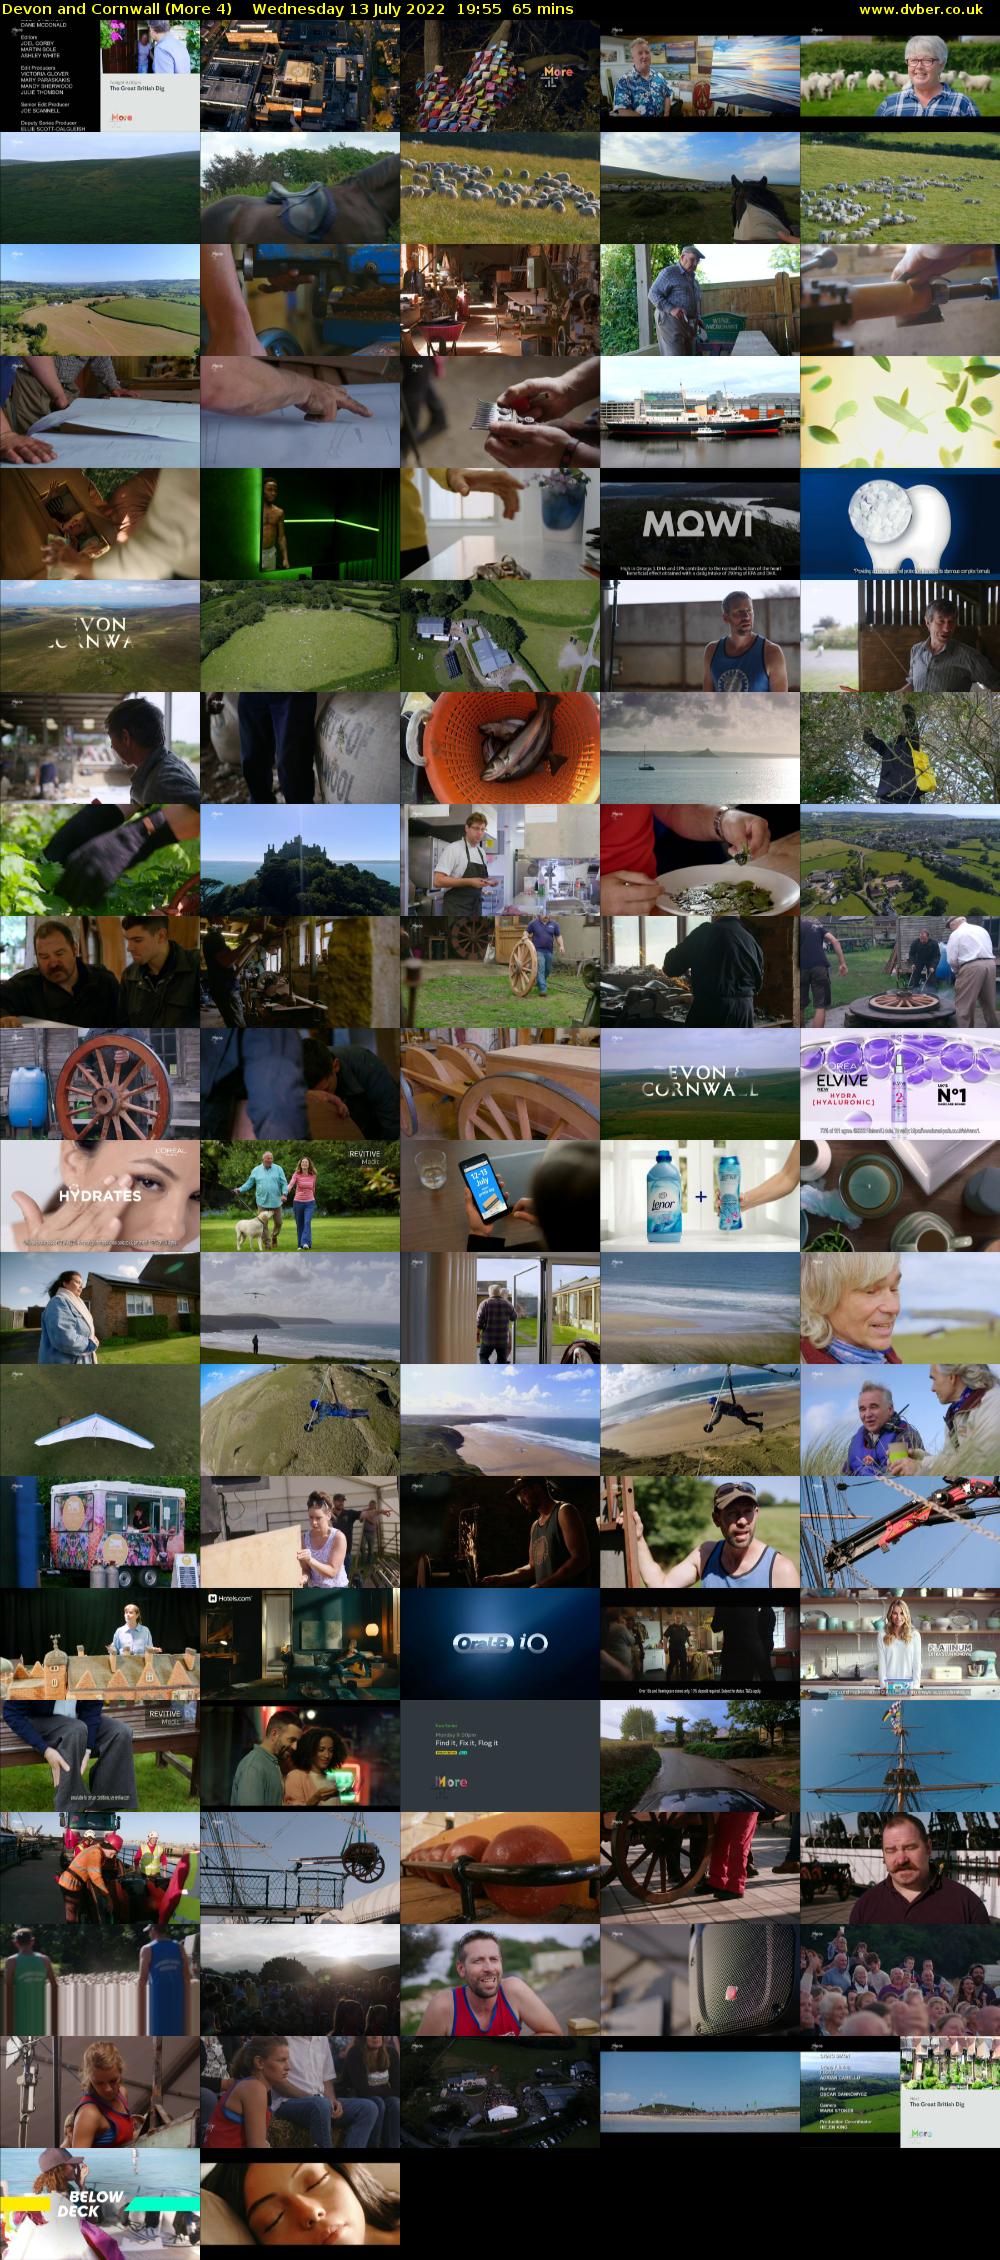 Devon and Cornwall (More 4) Wednesday 13 July 2022 19:55 - 21:00